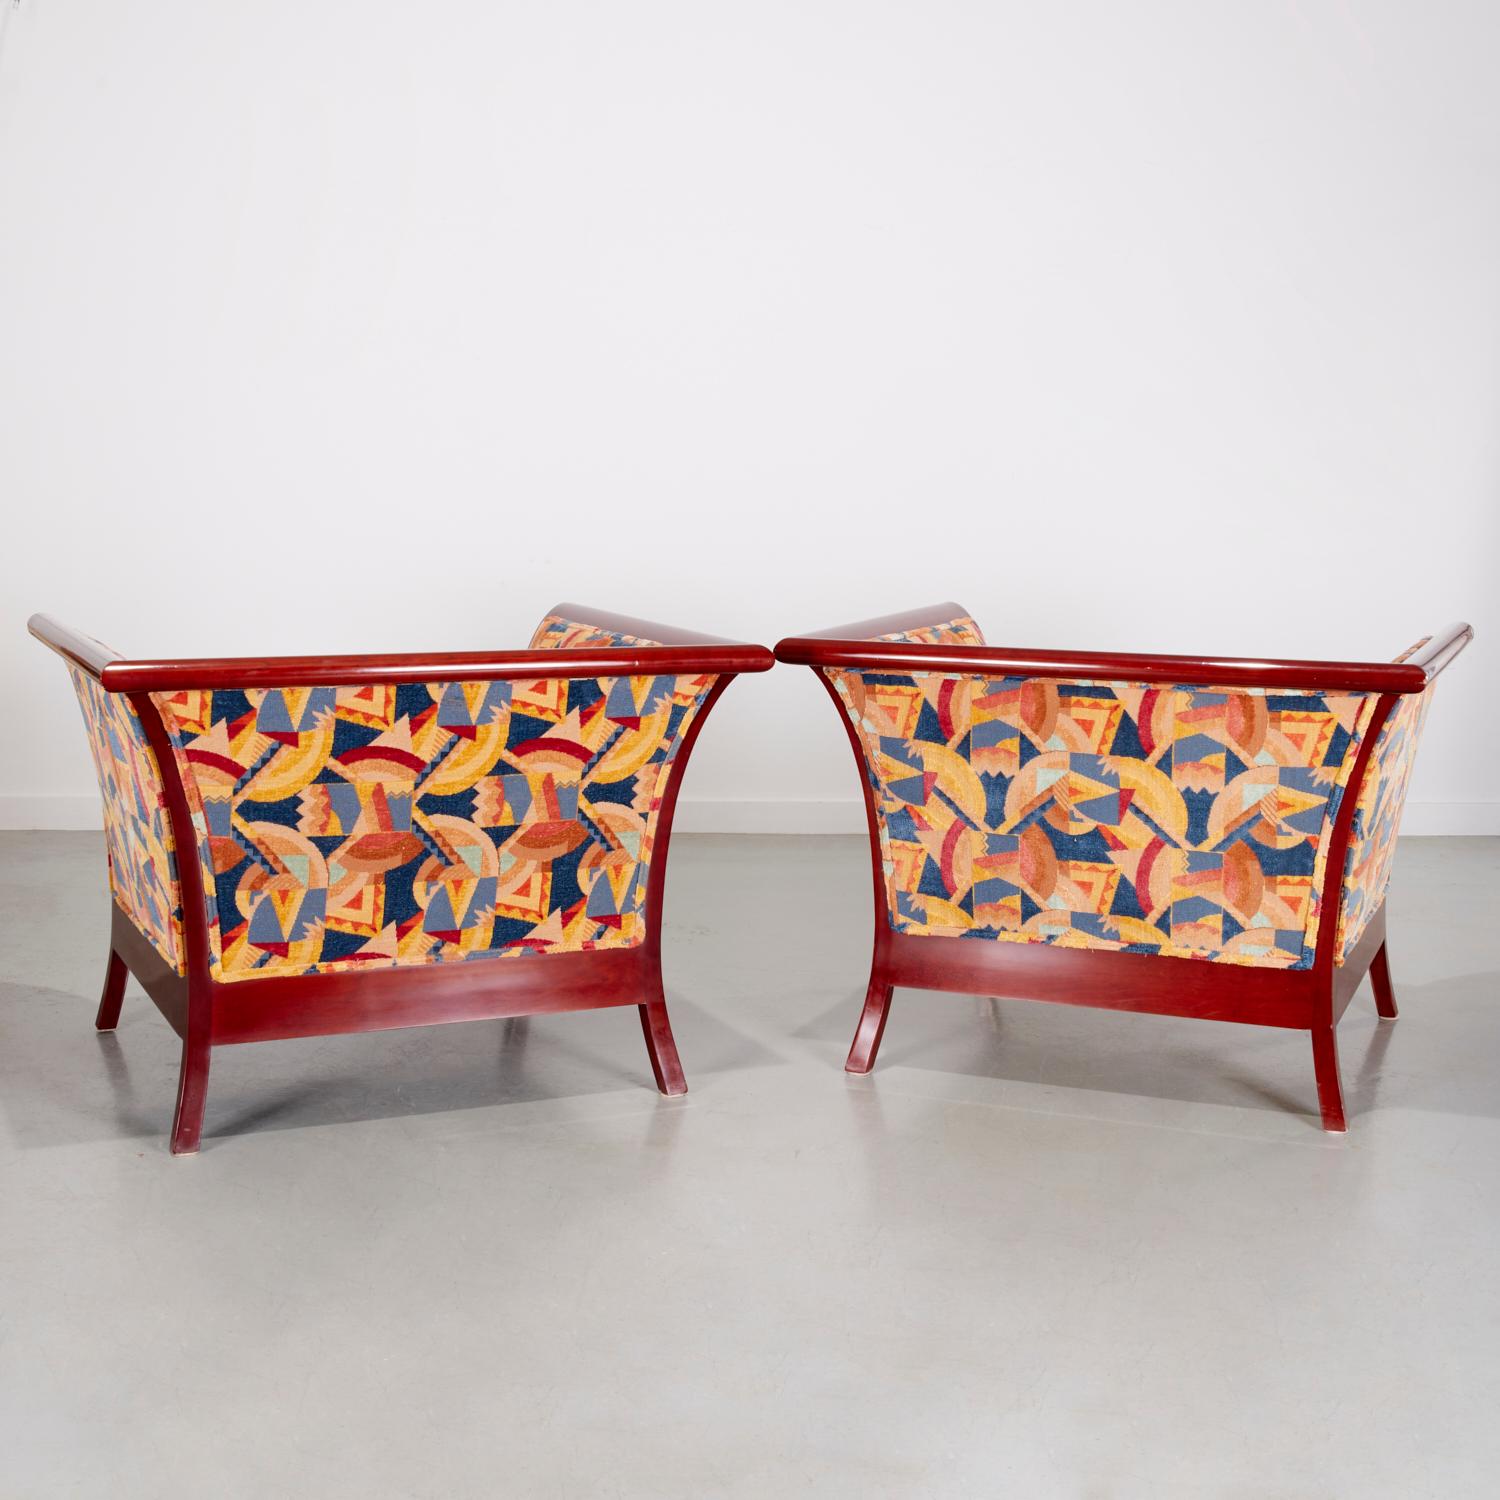 20th Century Kenneth Winslow Club Chairs in Deco Inspired Clarence House Cut Velvet Jacquard 